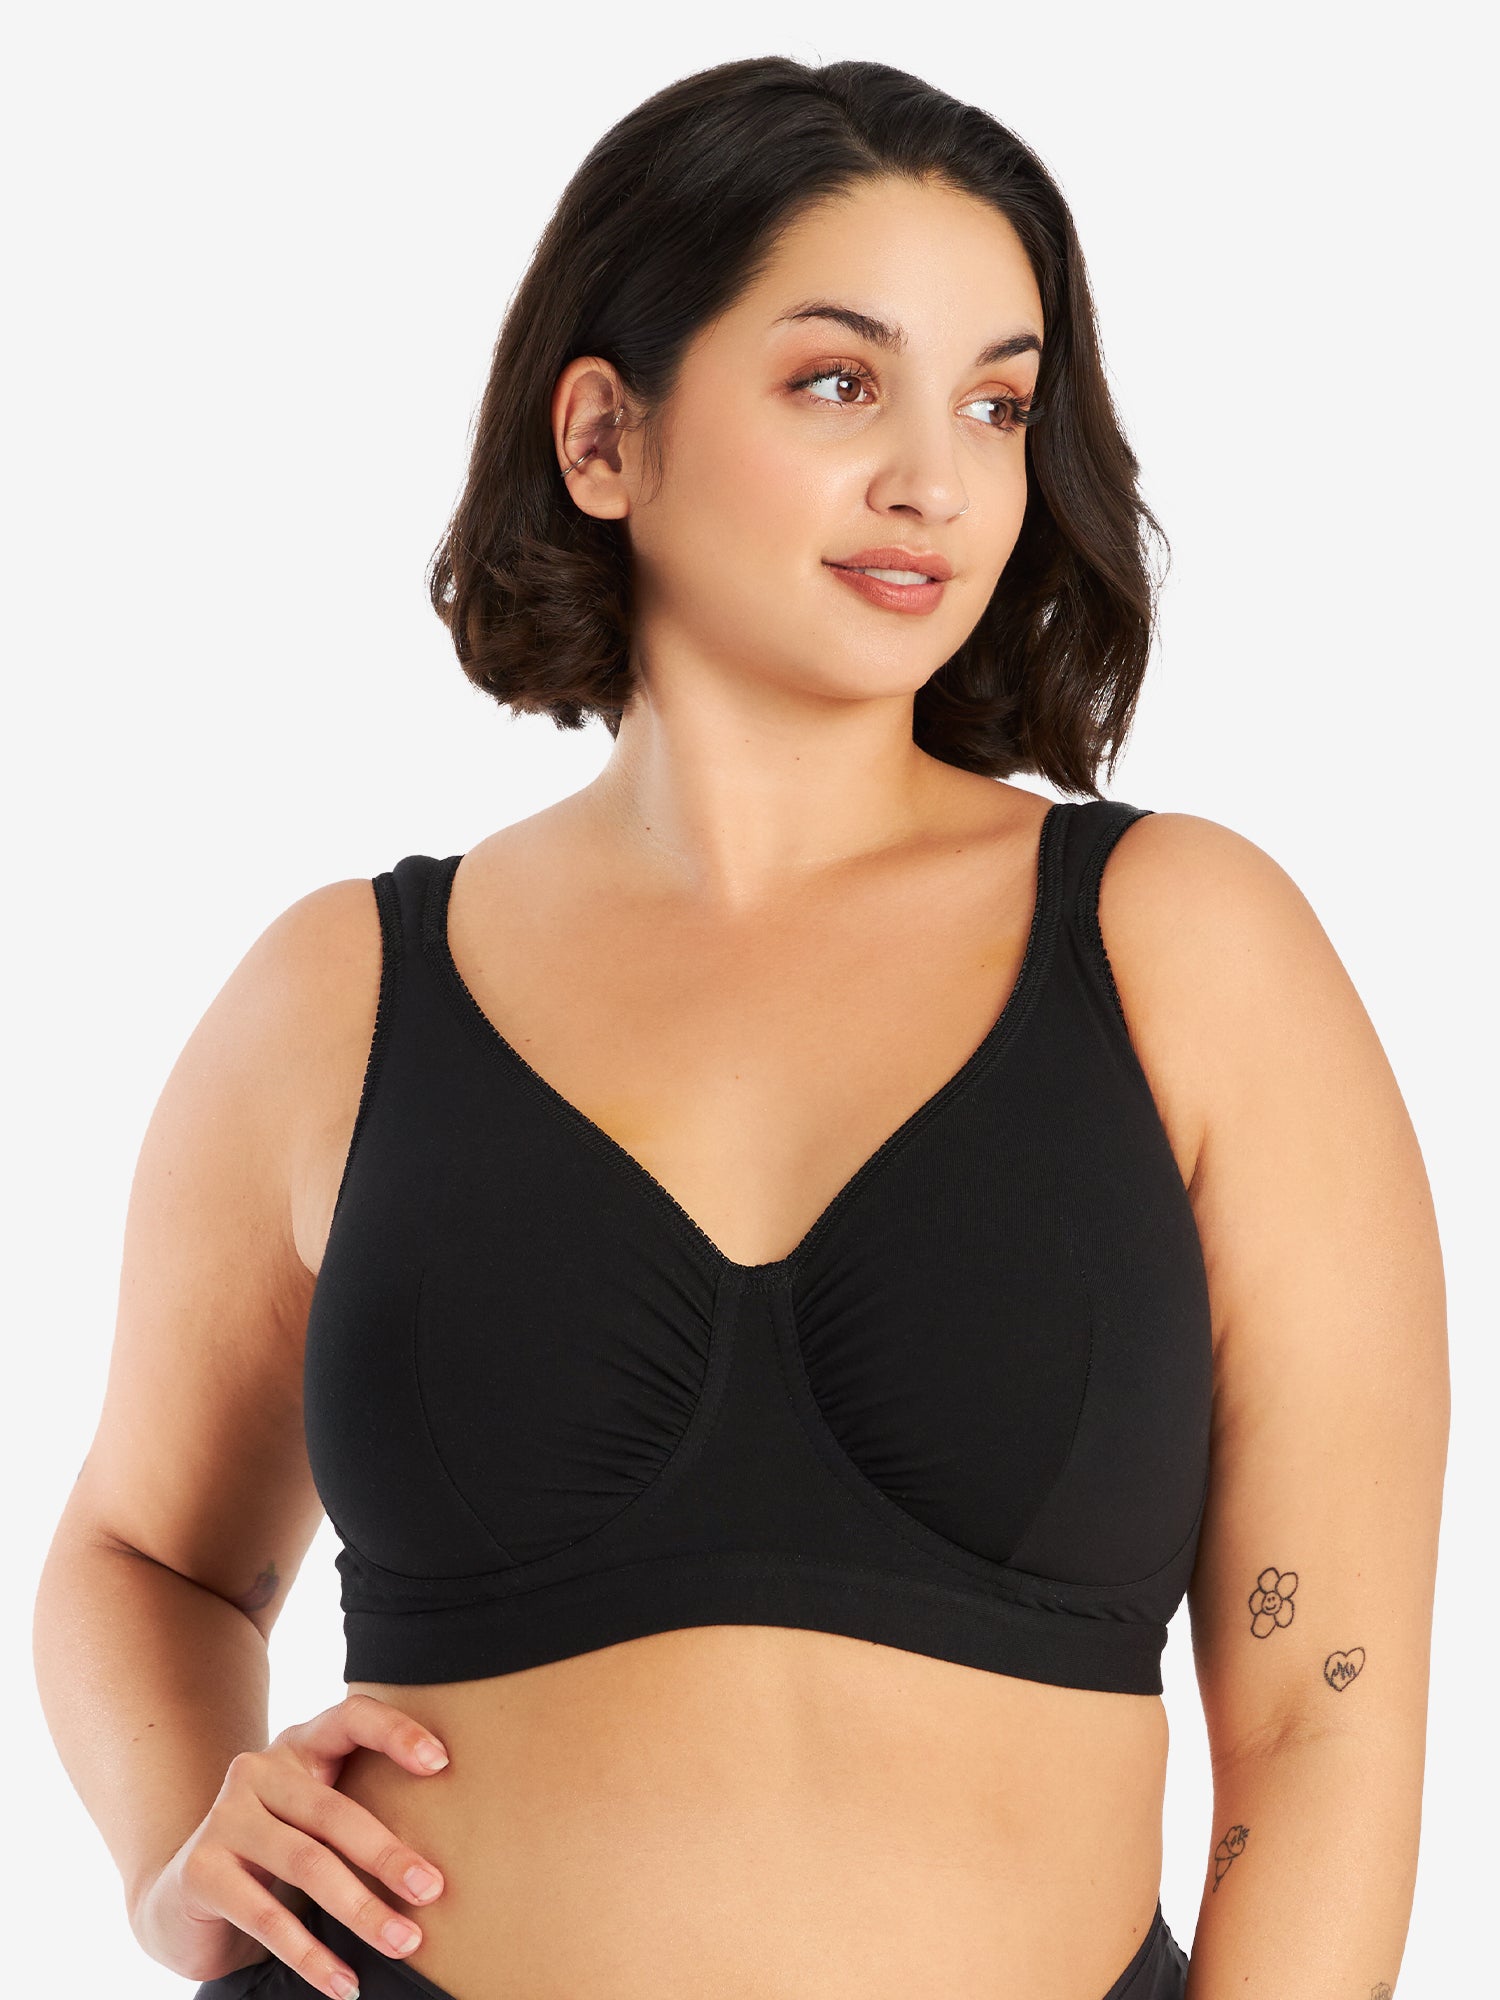 Z-I2-3 US Comfort Choice 100% Cotton Wire-Free Full Coverage Lightweight  Bras